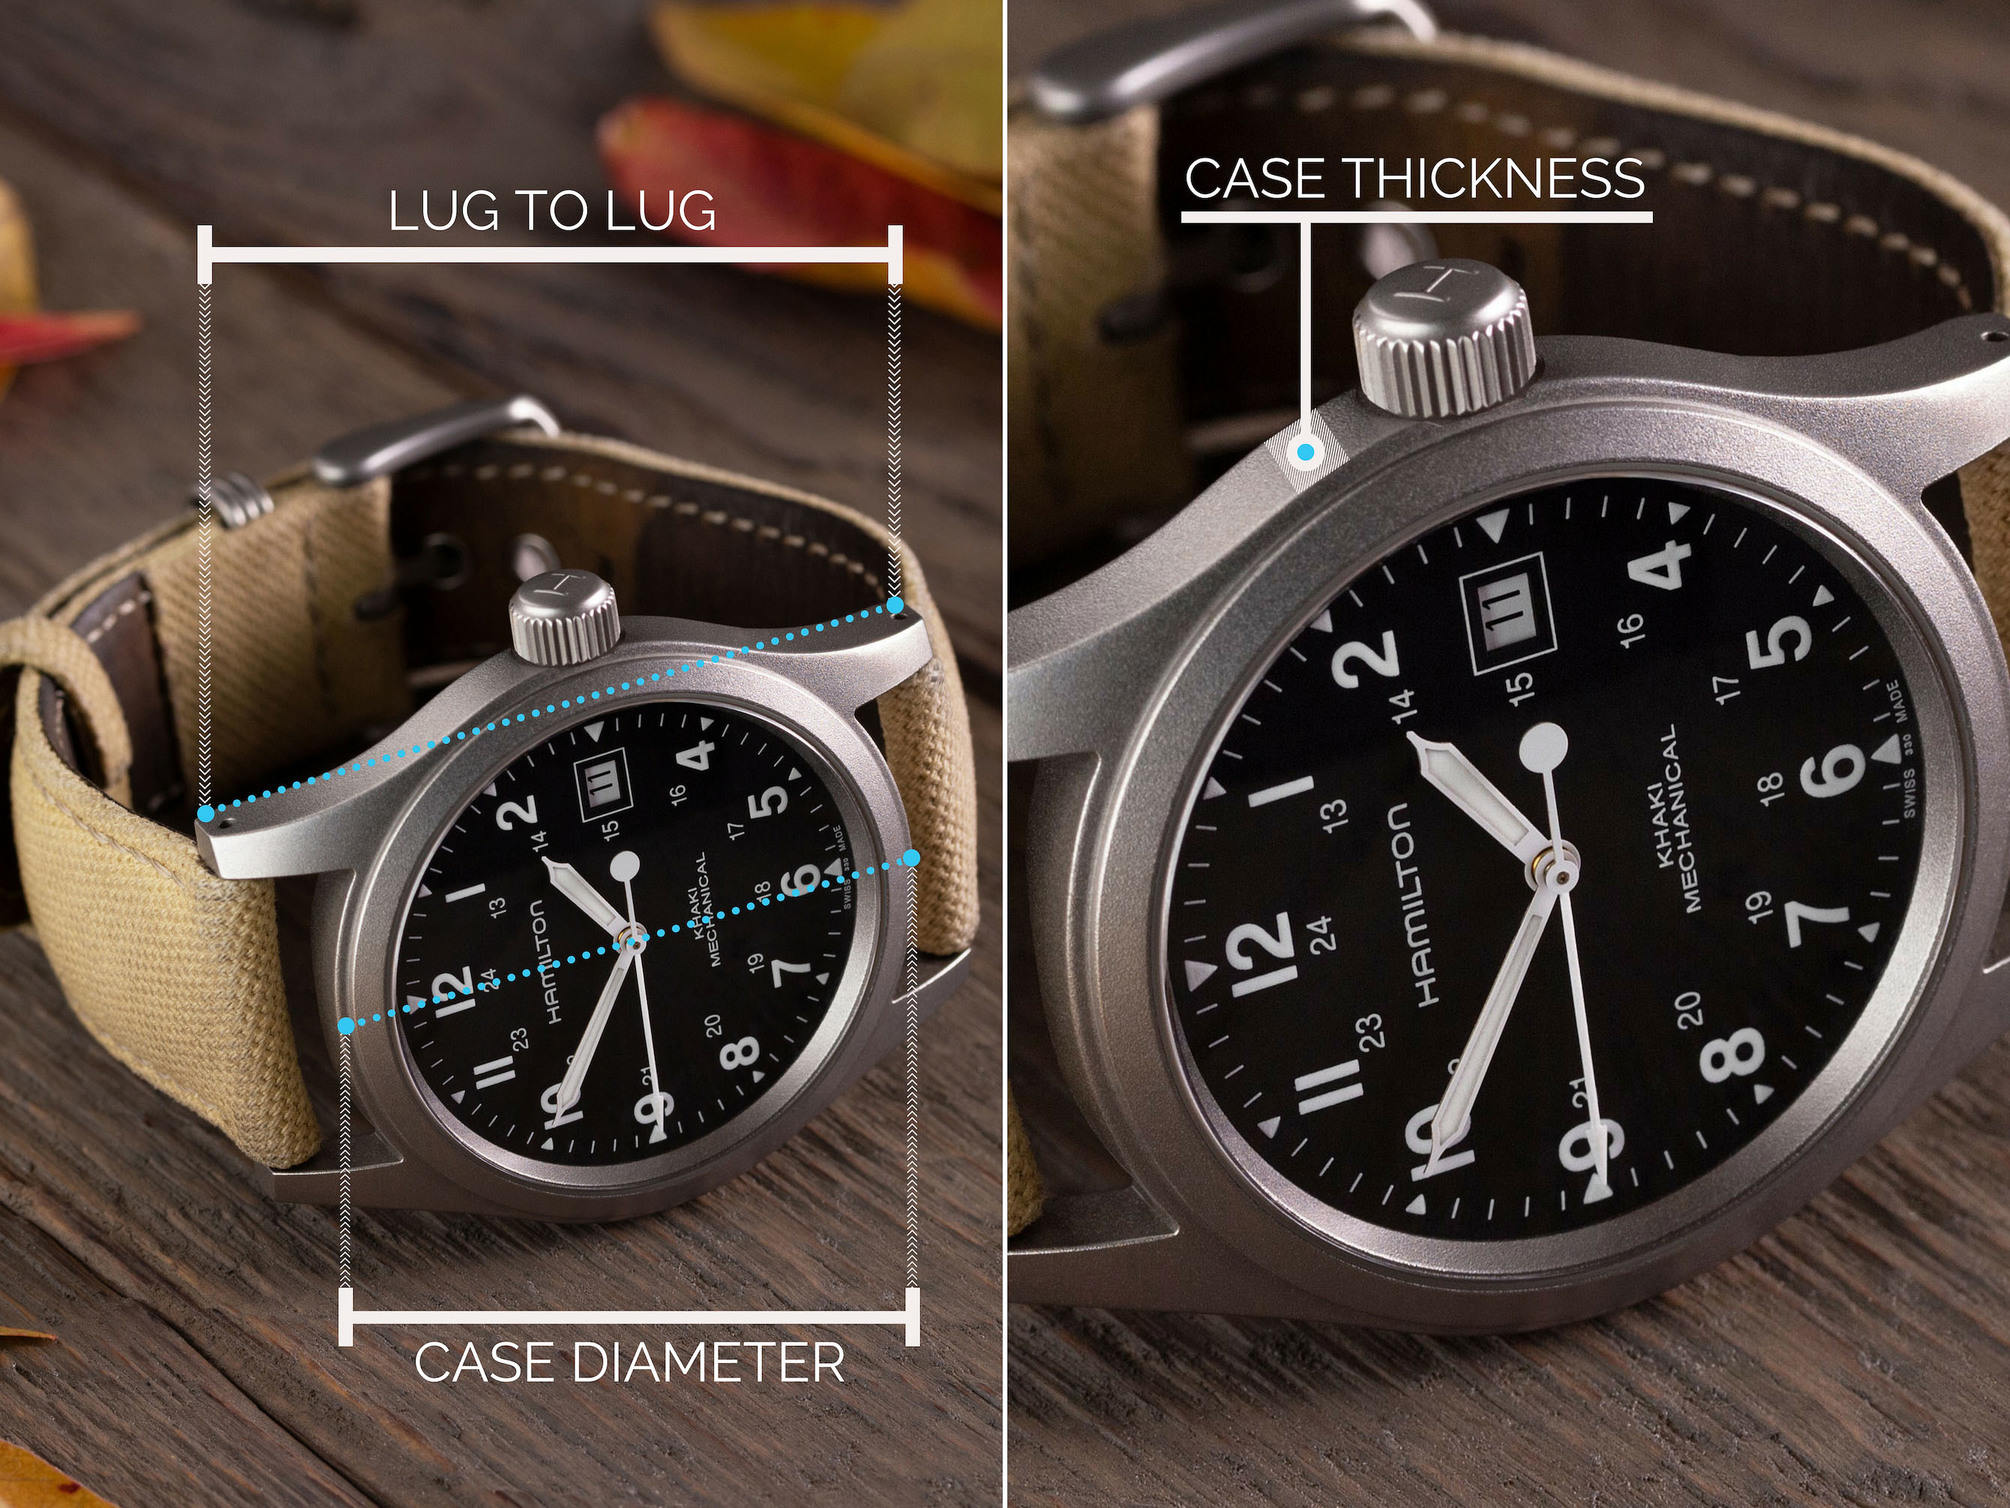 Watch size graphic detailing lug to lug, case diameter, and case thickness measurement points.